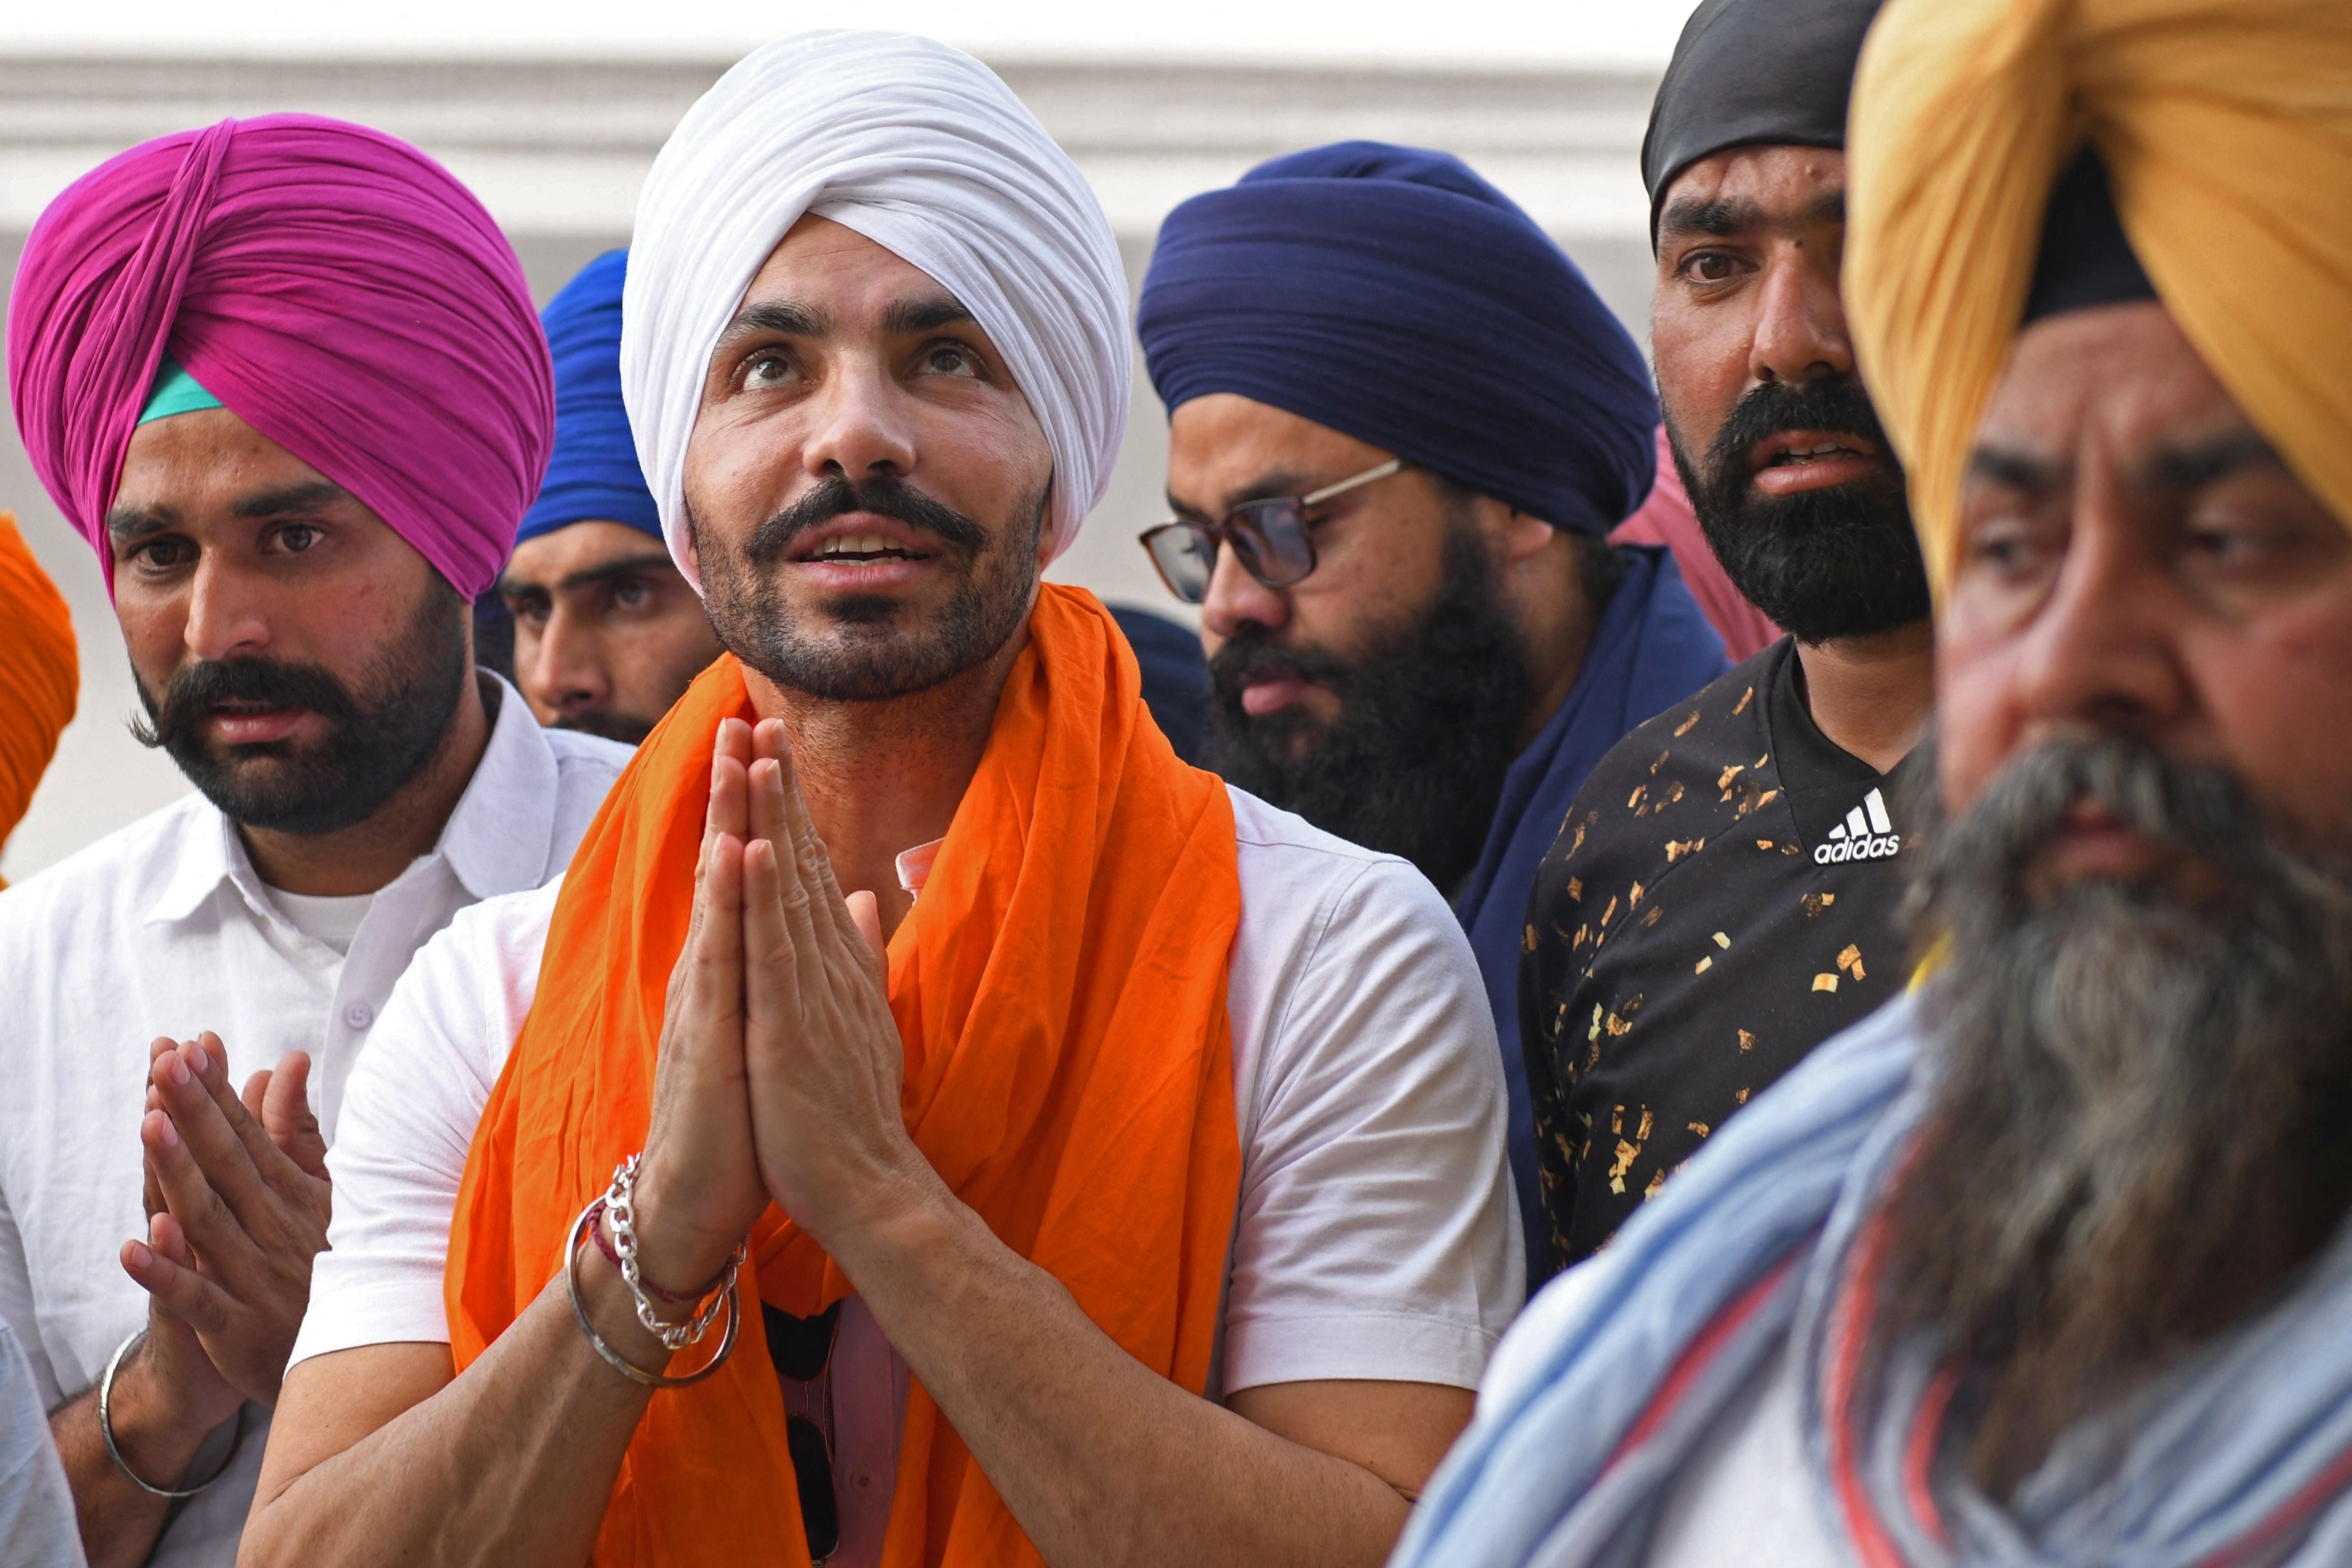 Deep Sidhu had joined widespread national protests against the controversial farm laws